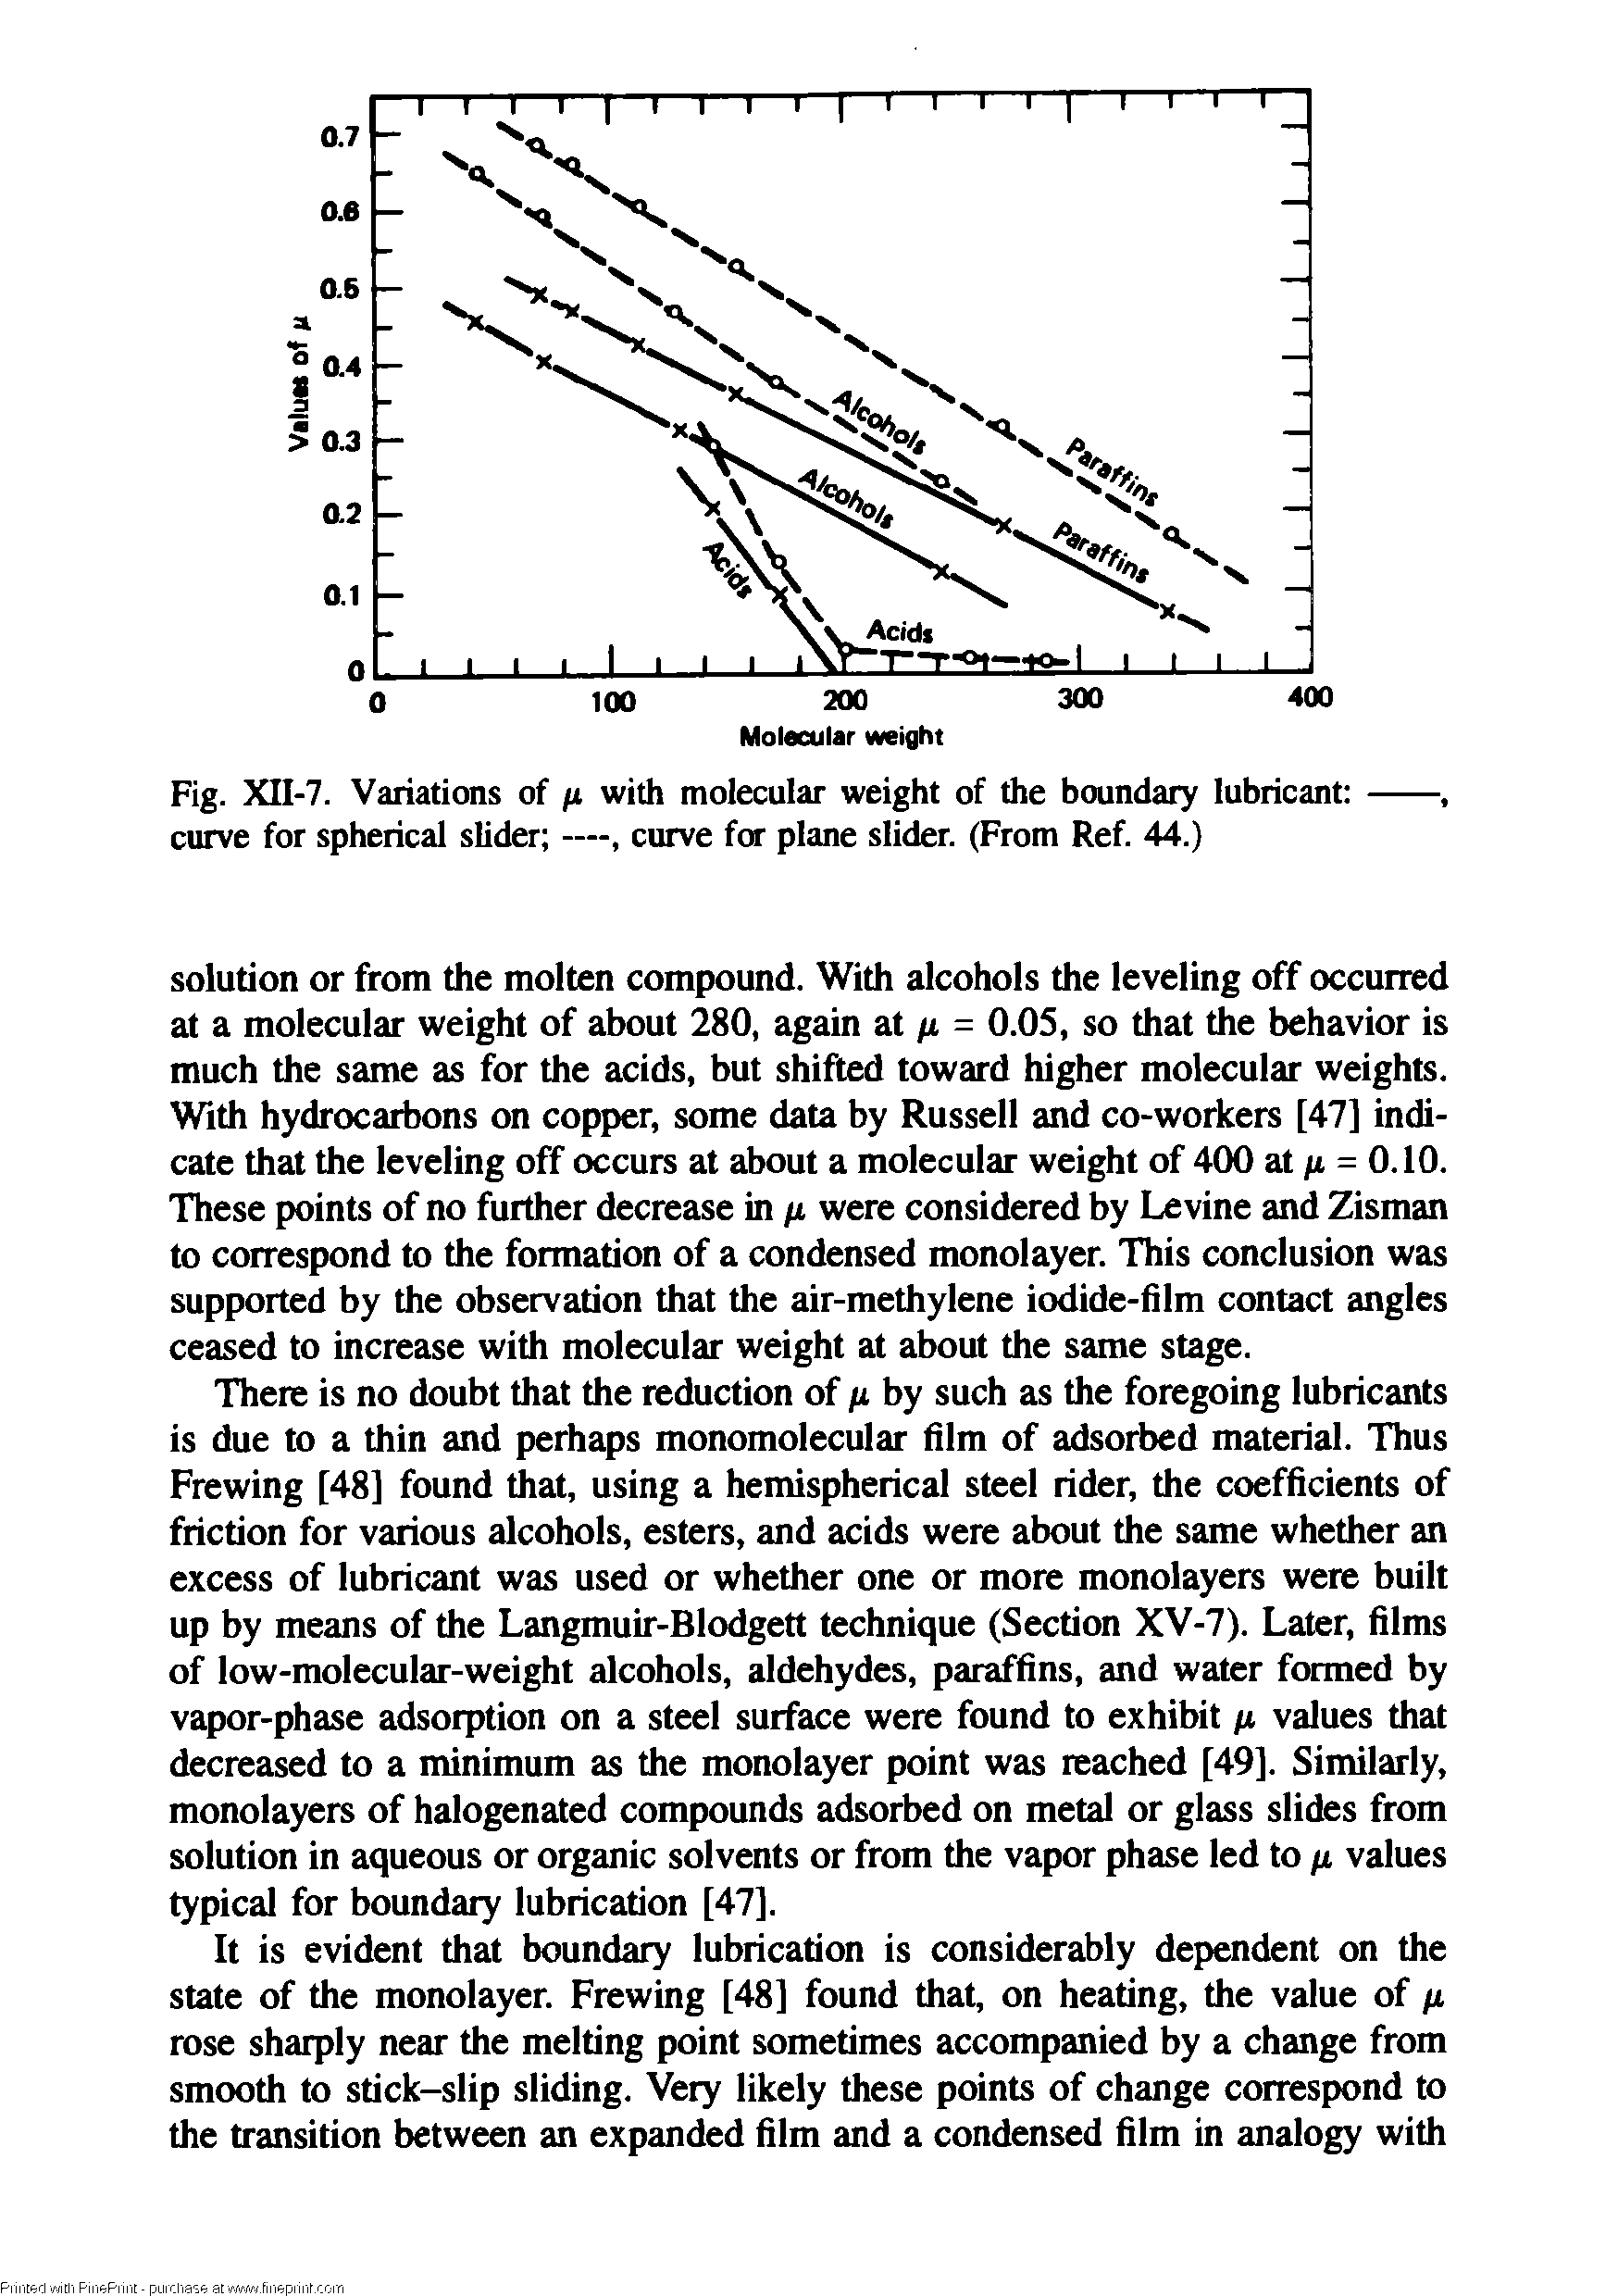 Fig. XII-7. Variations of /i with molecular weight of the boundary lubricant curve for spherical slider —, curve for plane slider. (From Ref. 44.)...